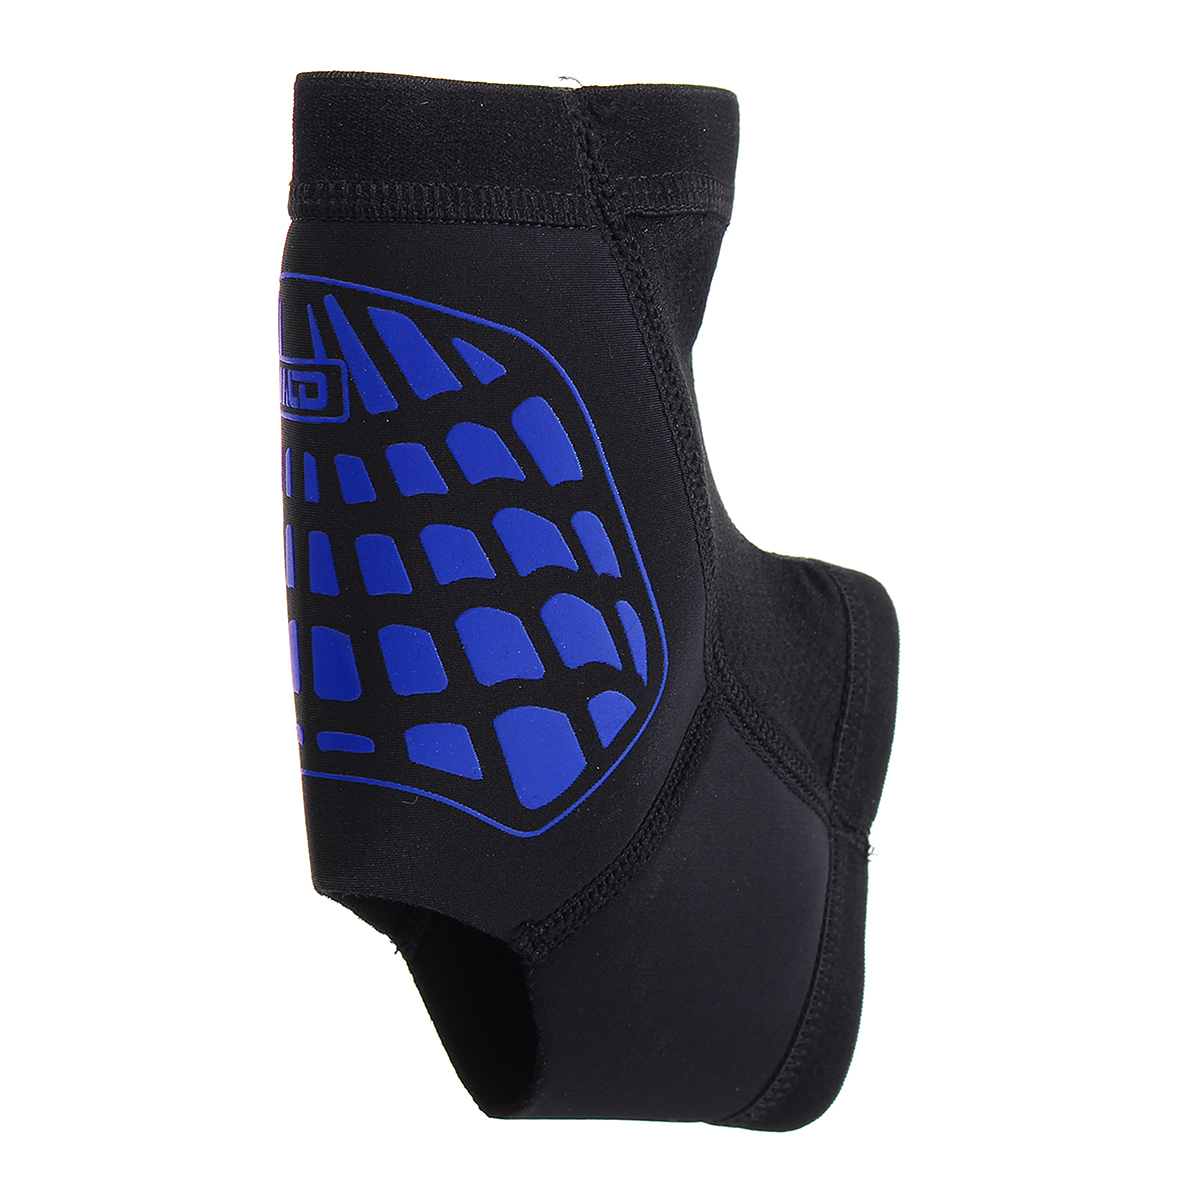 Single-Basketball-Cycling-Running-Ankle-Pad-Brace-Sports-Exercise-Protector-1130134-6